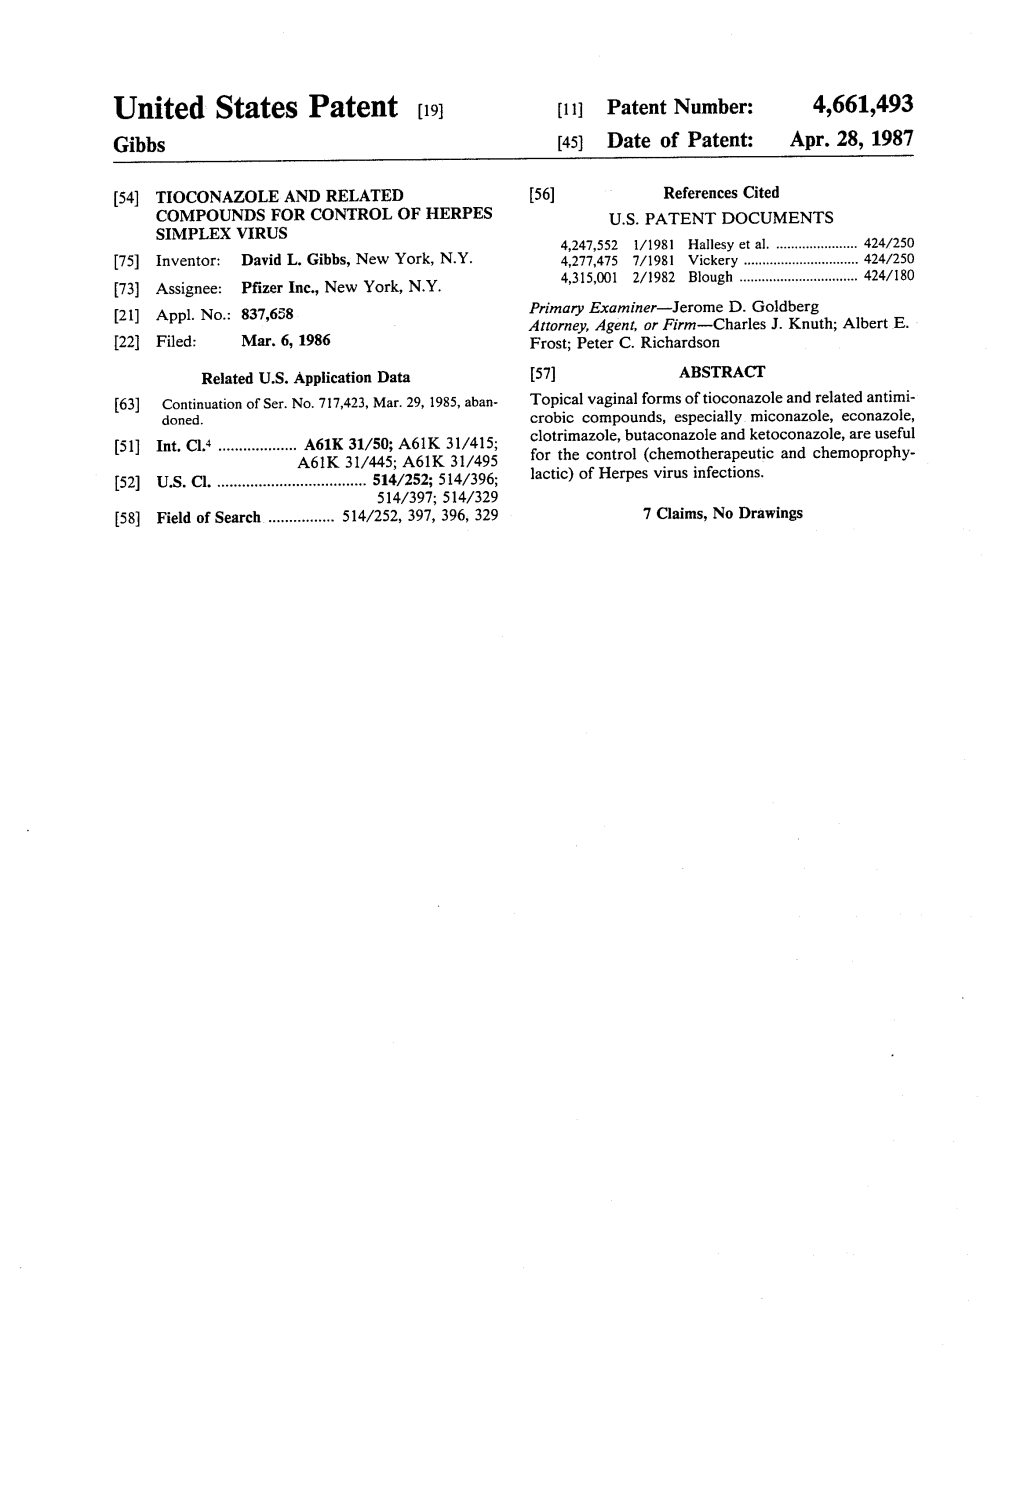 United States Patent (19) 11 Patent Number: 4,661,493 Gibbs (45) Date of Patent: Apr